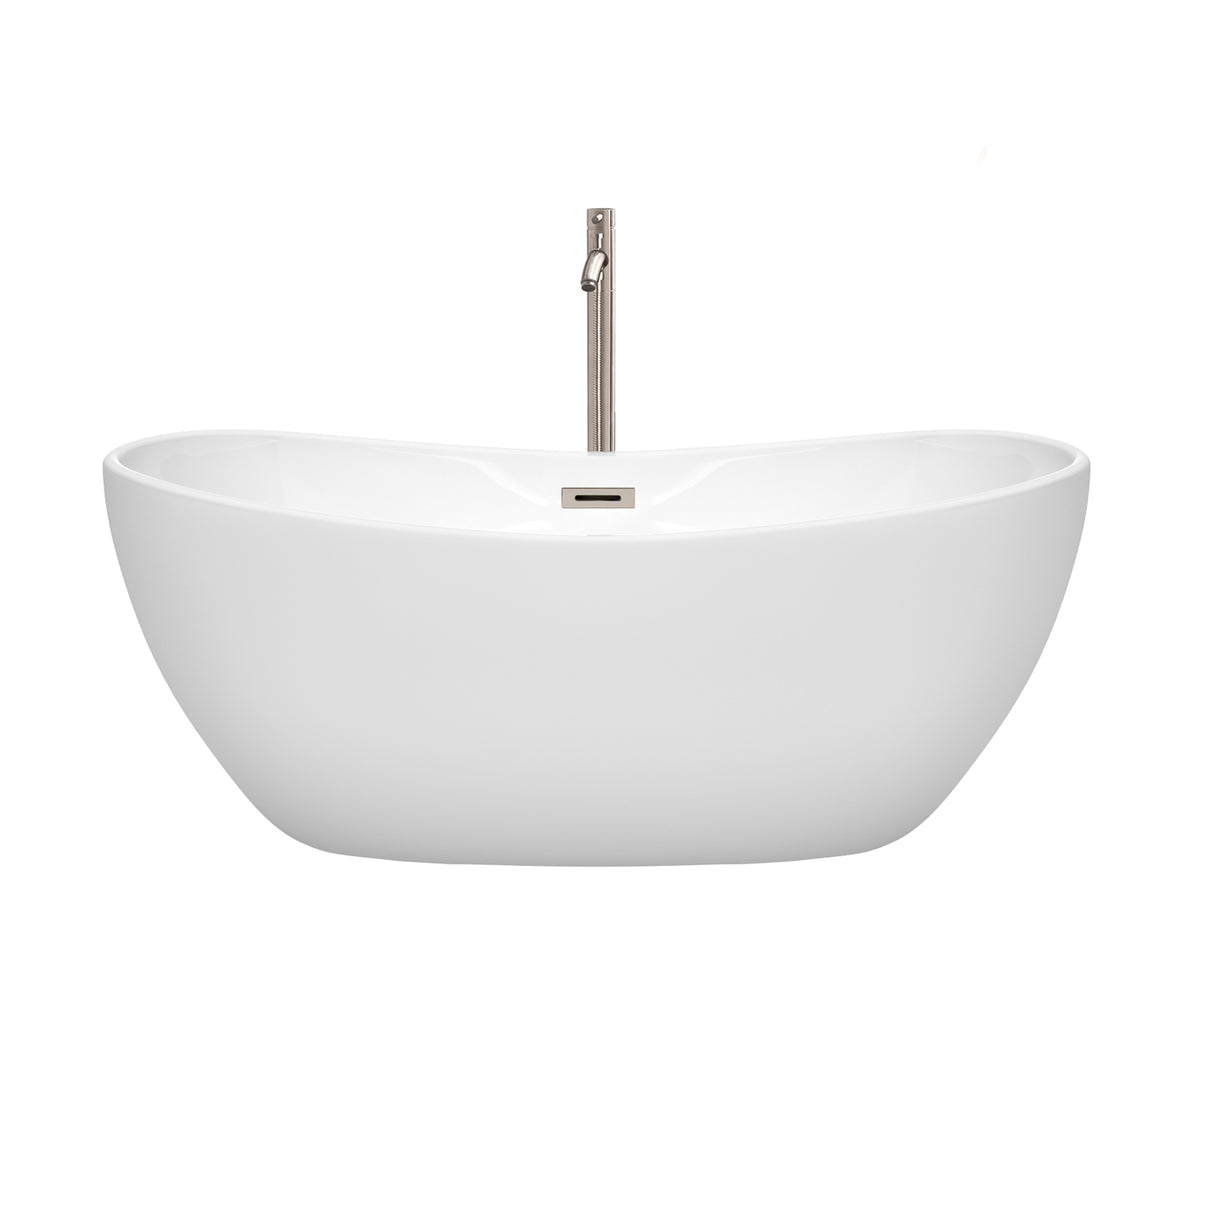 Rebecca 60 Inch Freestanding Bathtub in White with Floor Mounted Faucet Drain and Overflow Trim in Brushed Nickel